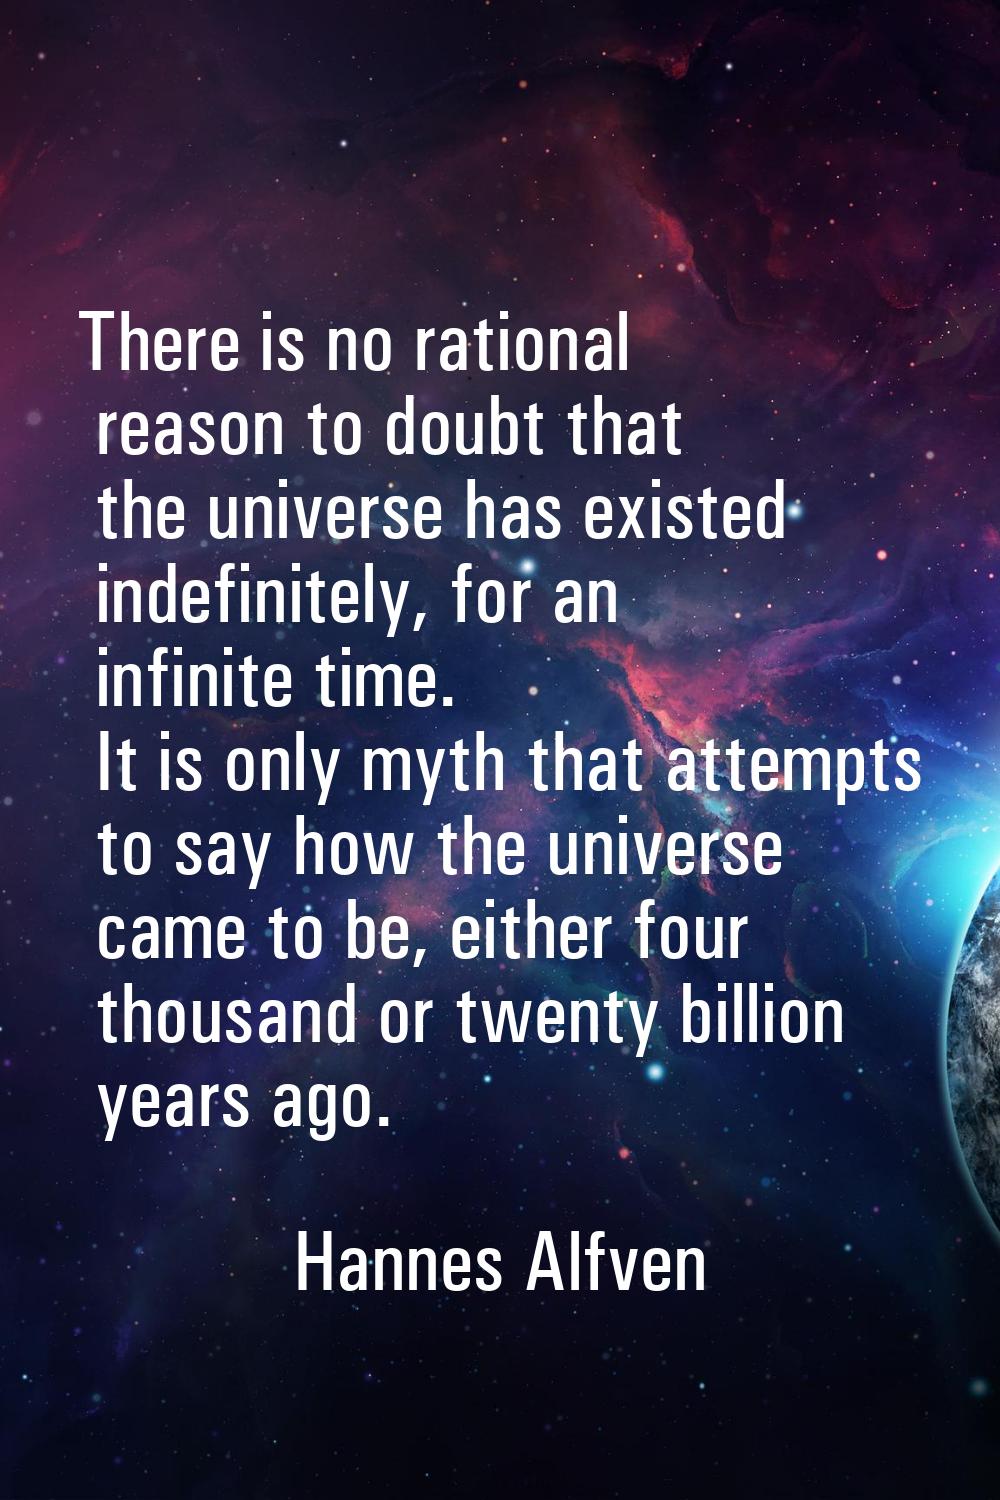 There is no rational reason to doubt that the universe has existed indefinitely, for an infinite ti